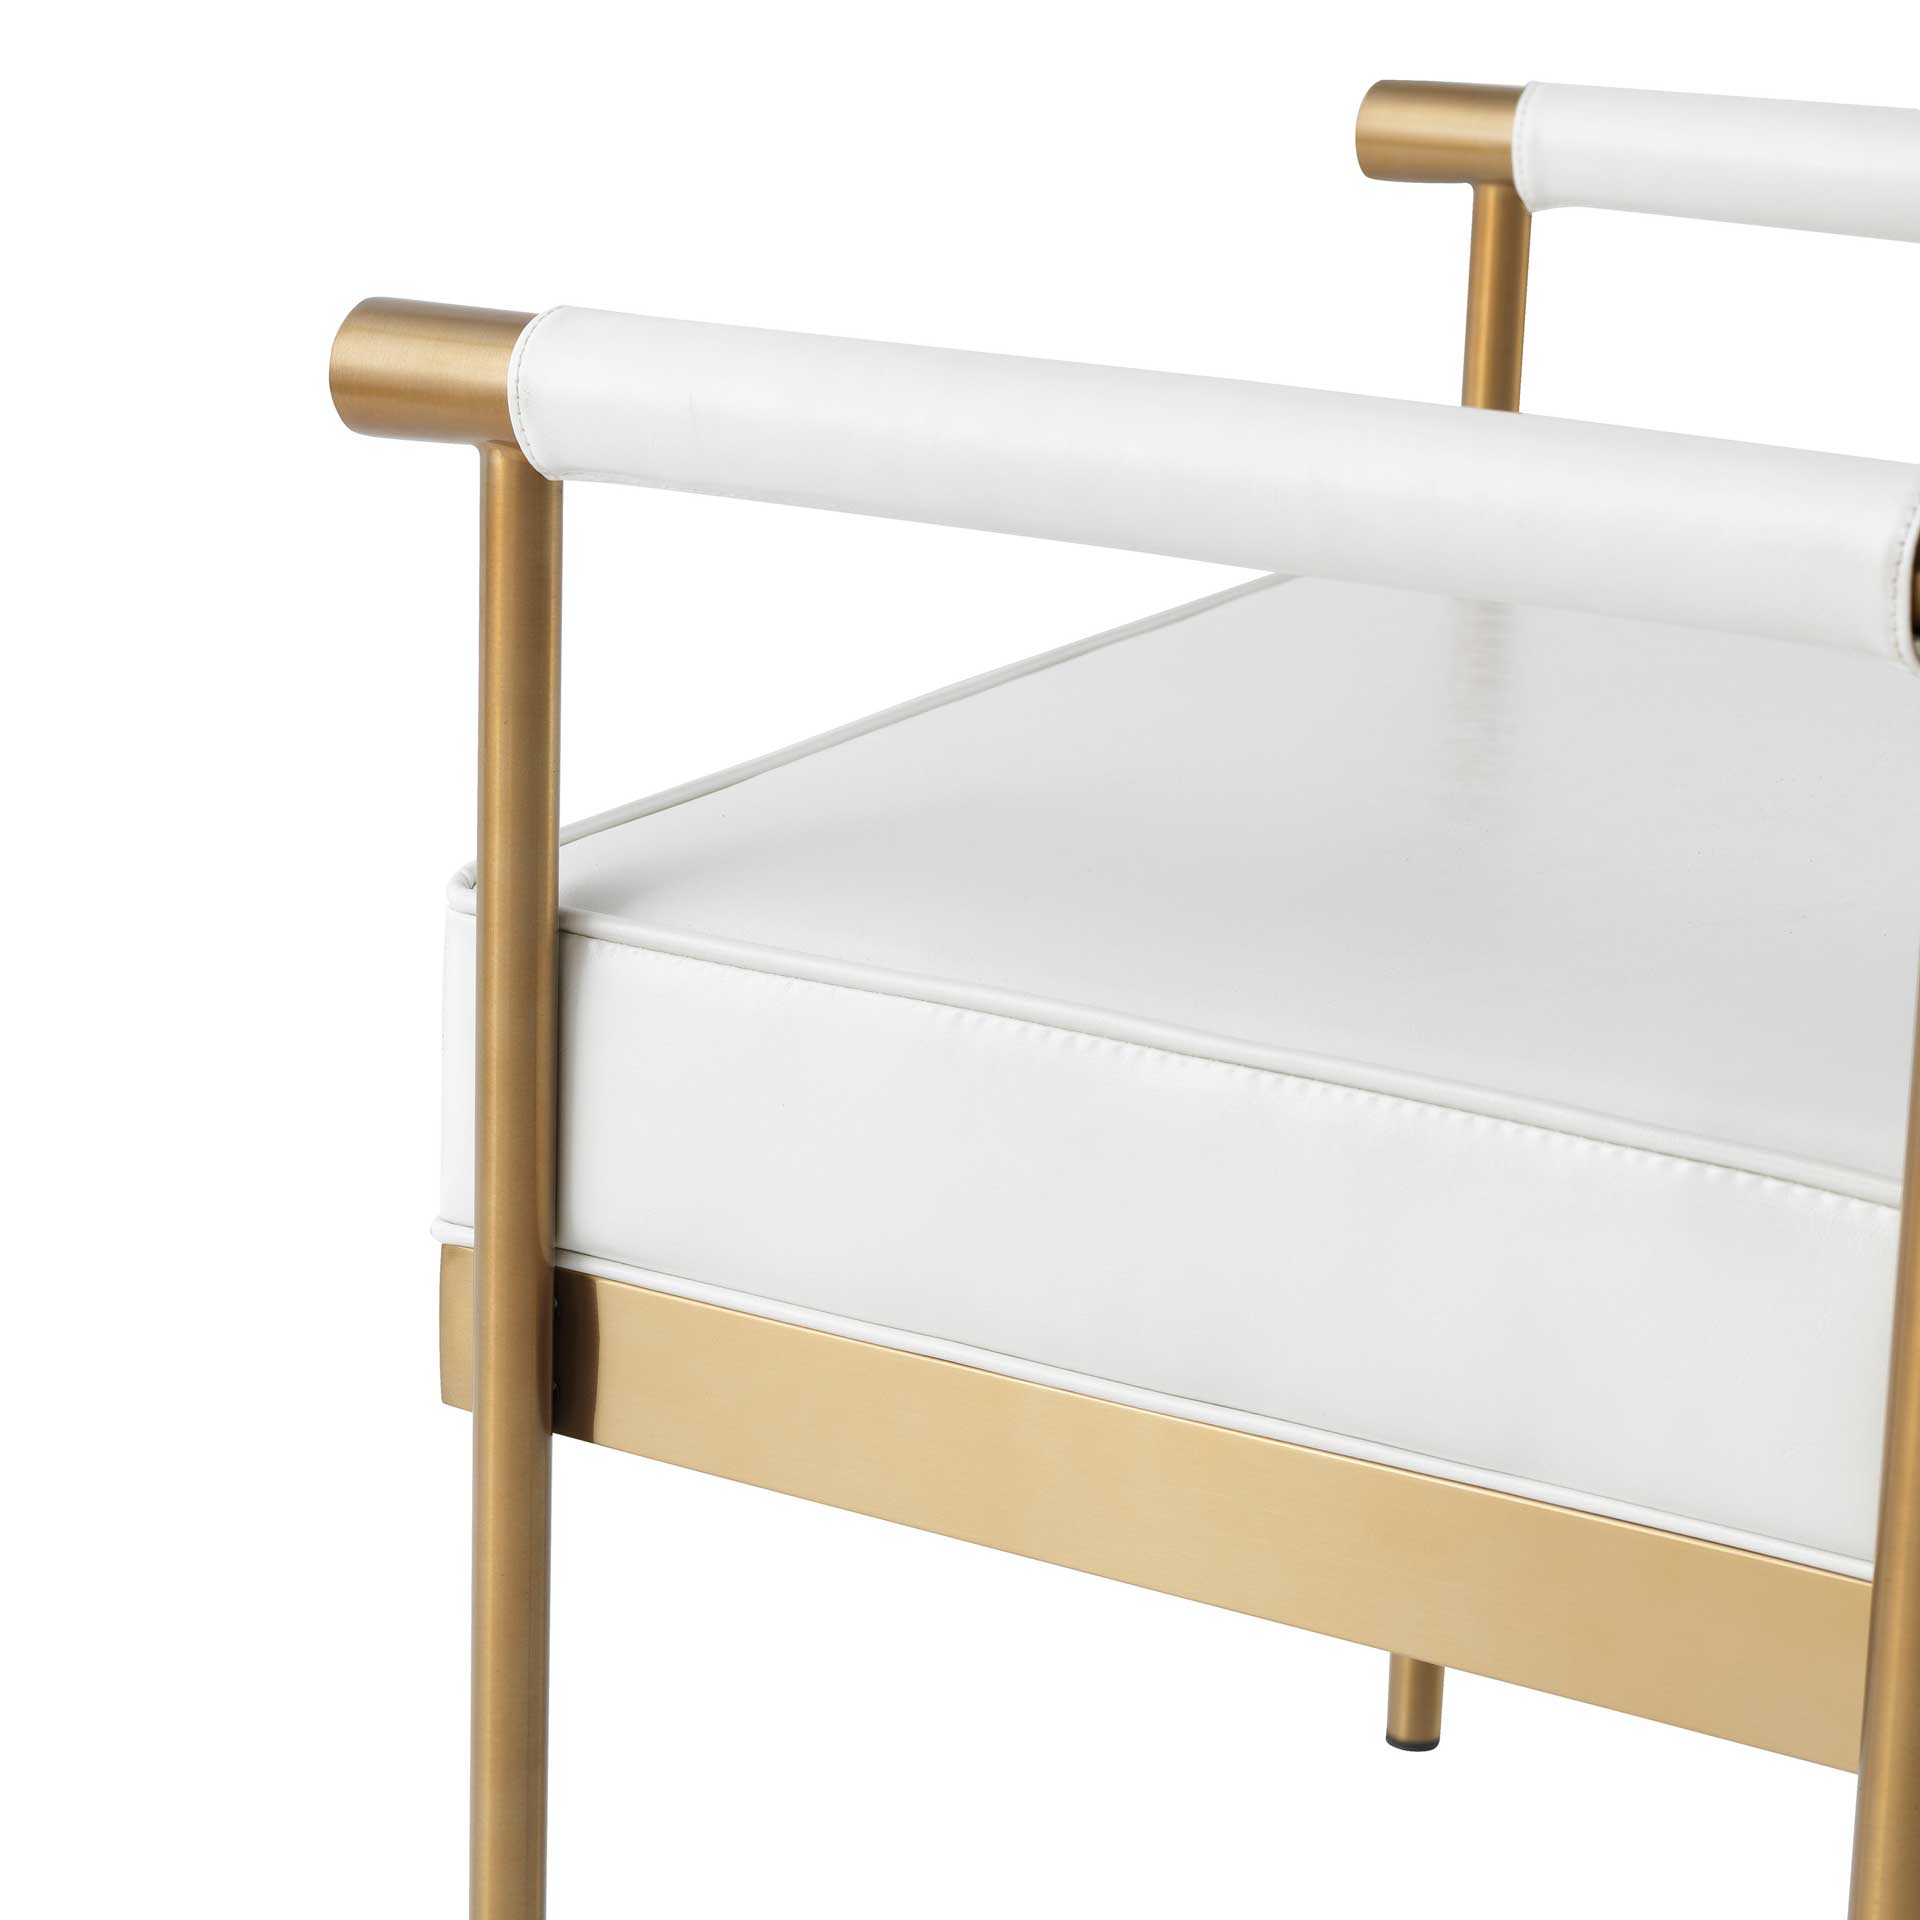 Dion Vegan Leather Bench White